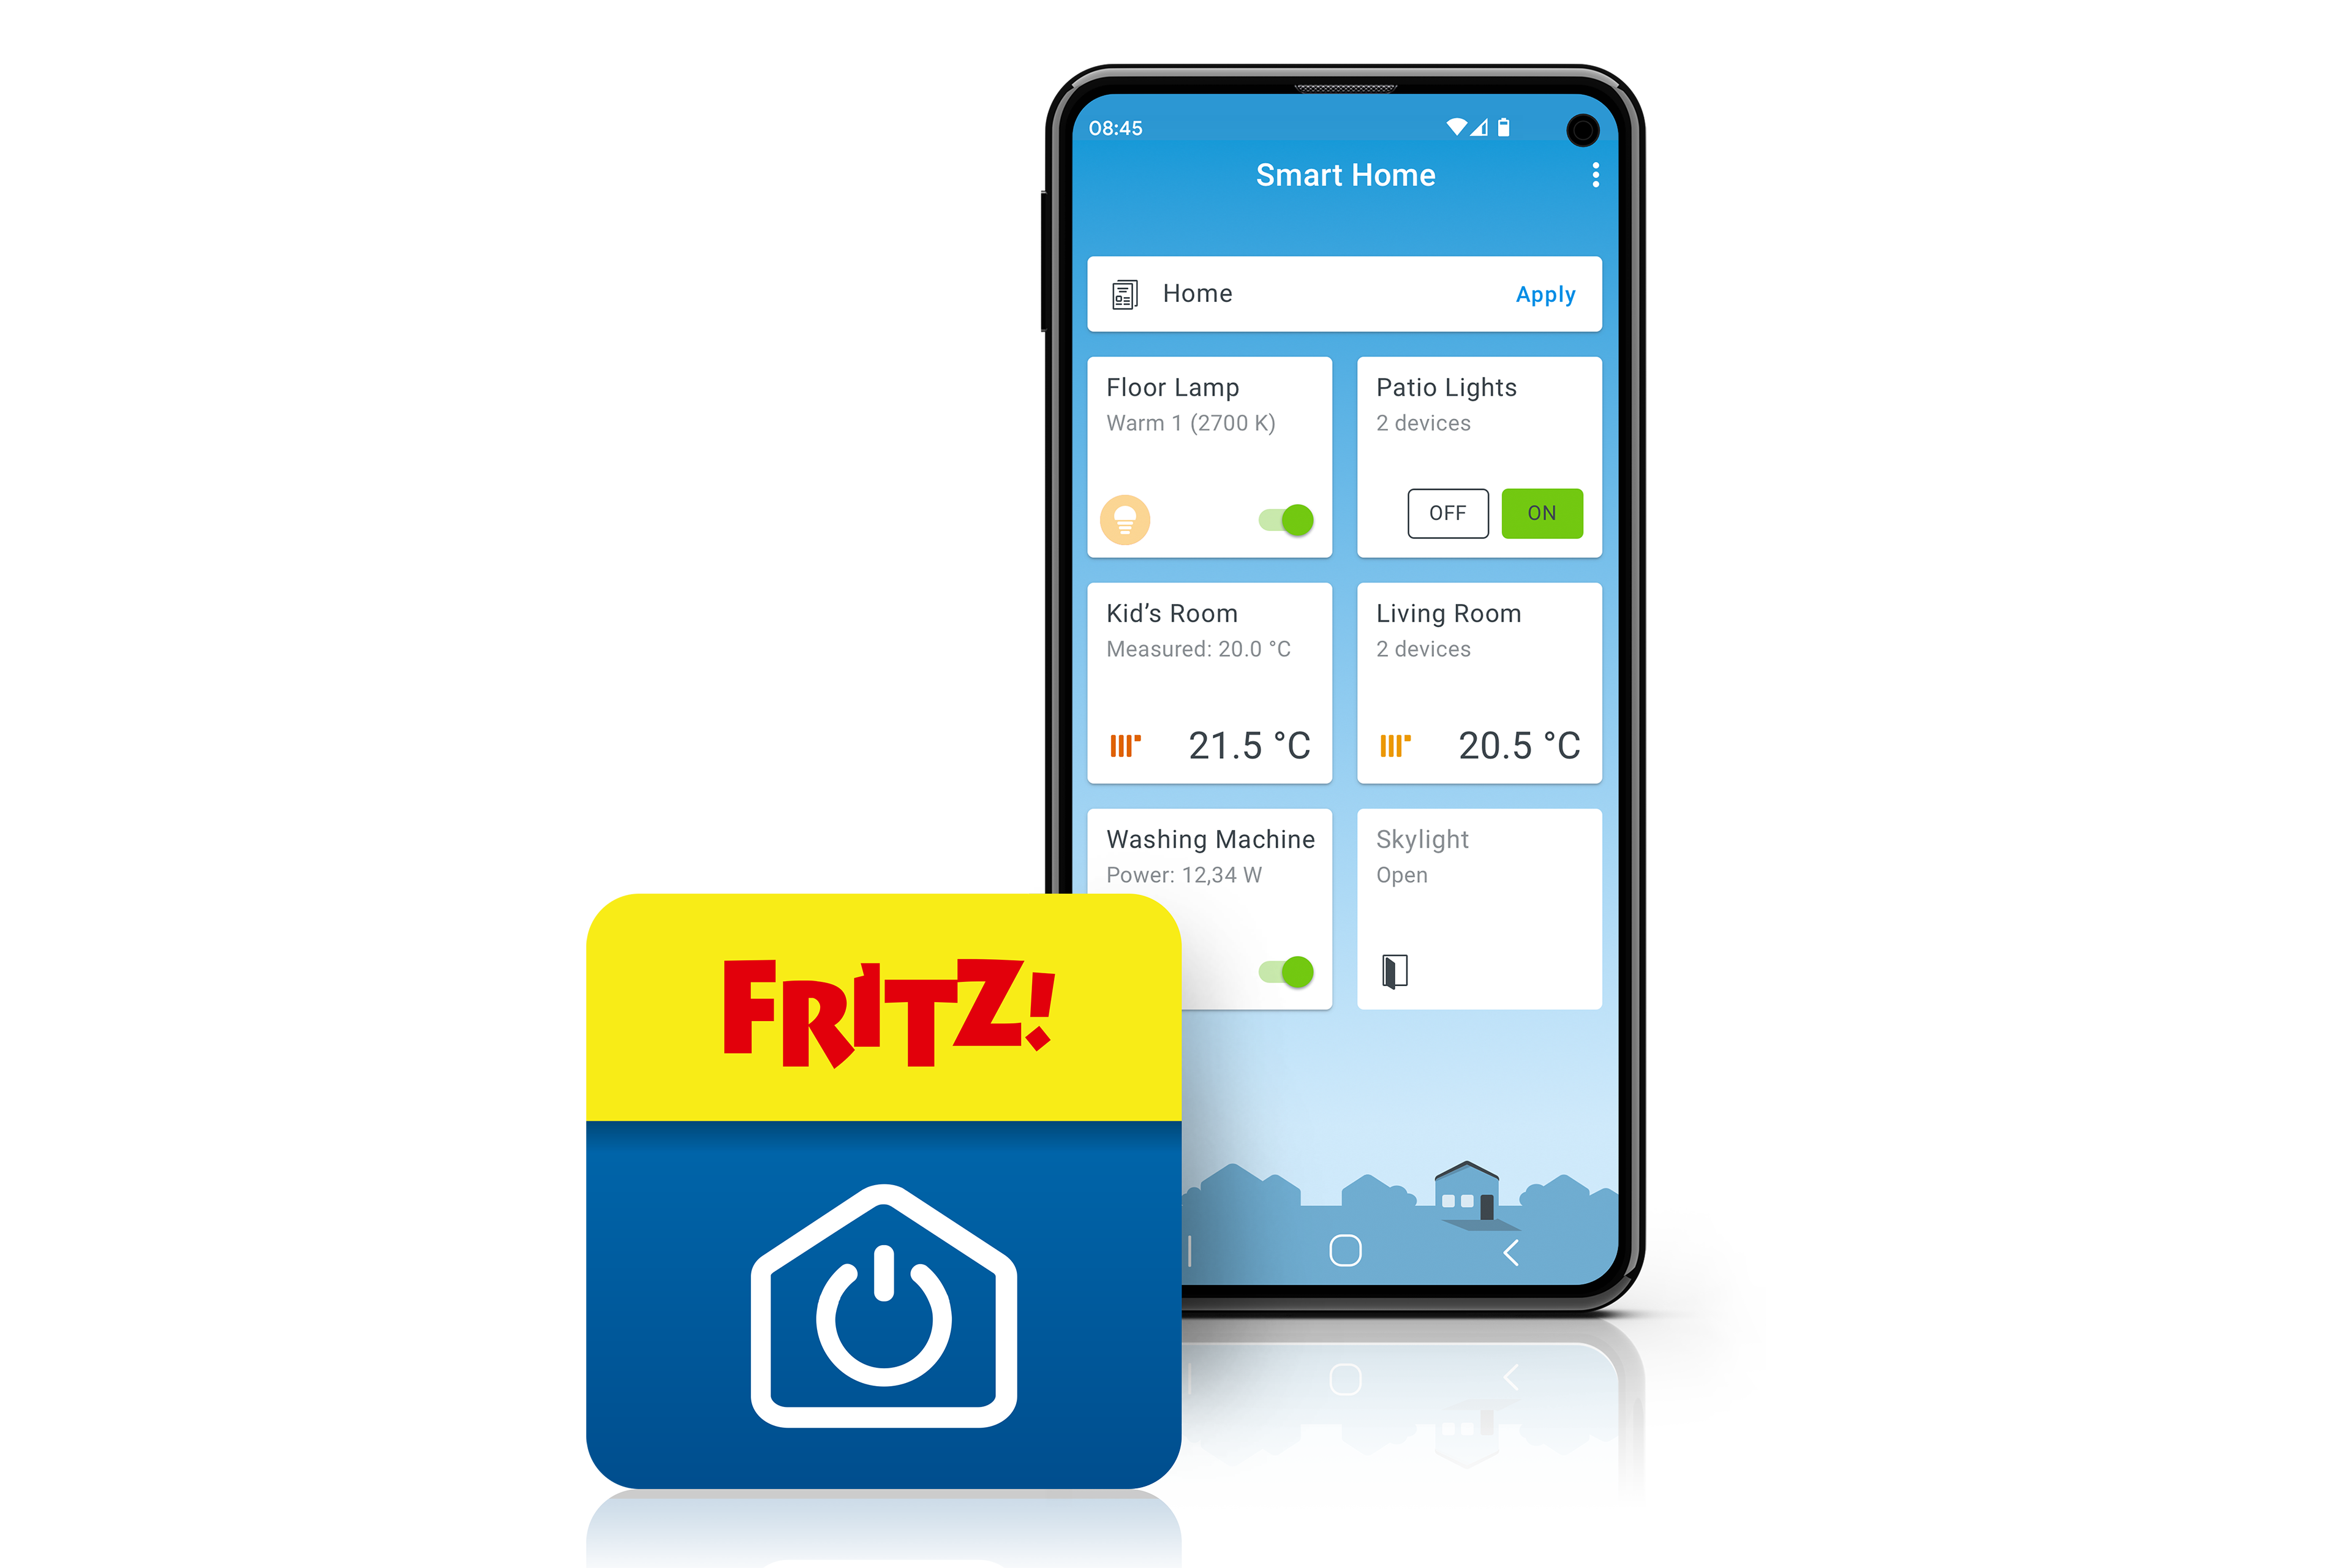 Apple iPhone, display, FRITZ! Smart Home app, radiator, WLAN radiator  thermostat FRITZ! DECT 302, display shows snowflakes icon, frost protection  approx ö°C., white background, icon image, smartphone for heating control,  smart home